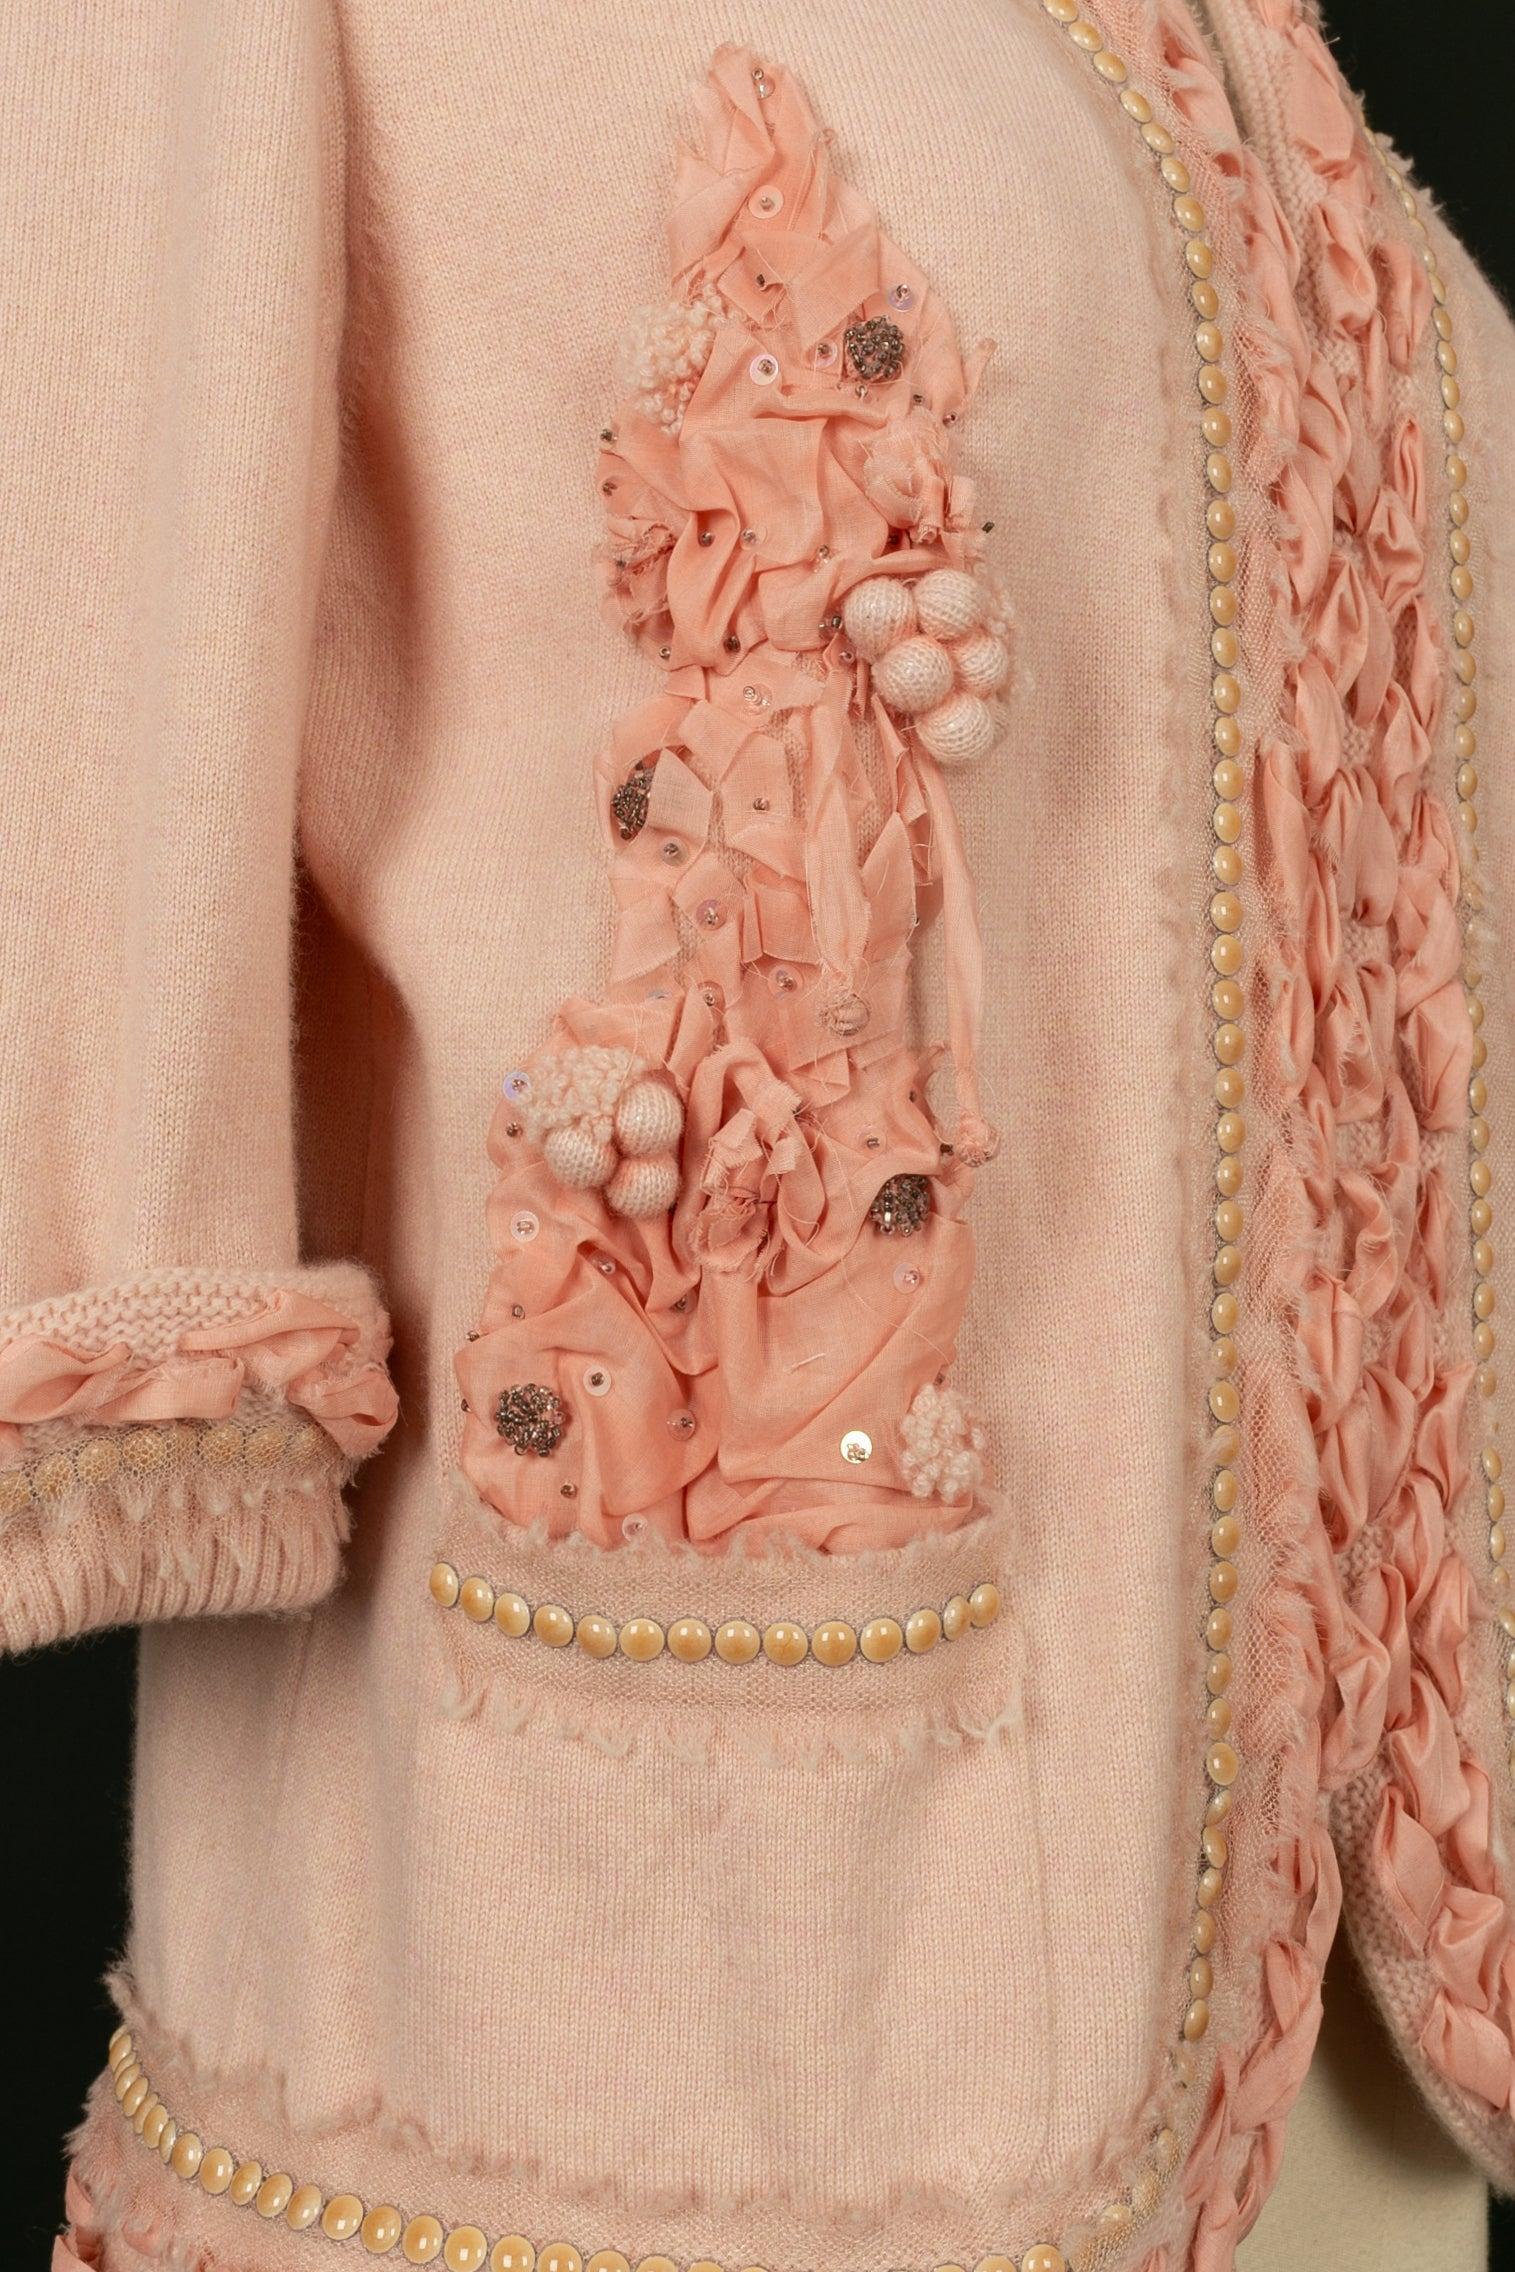 Chanel Cardigan in Pink Cashmere Enhanced with Ribbons, Pearls For Sale 1